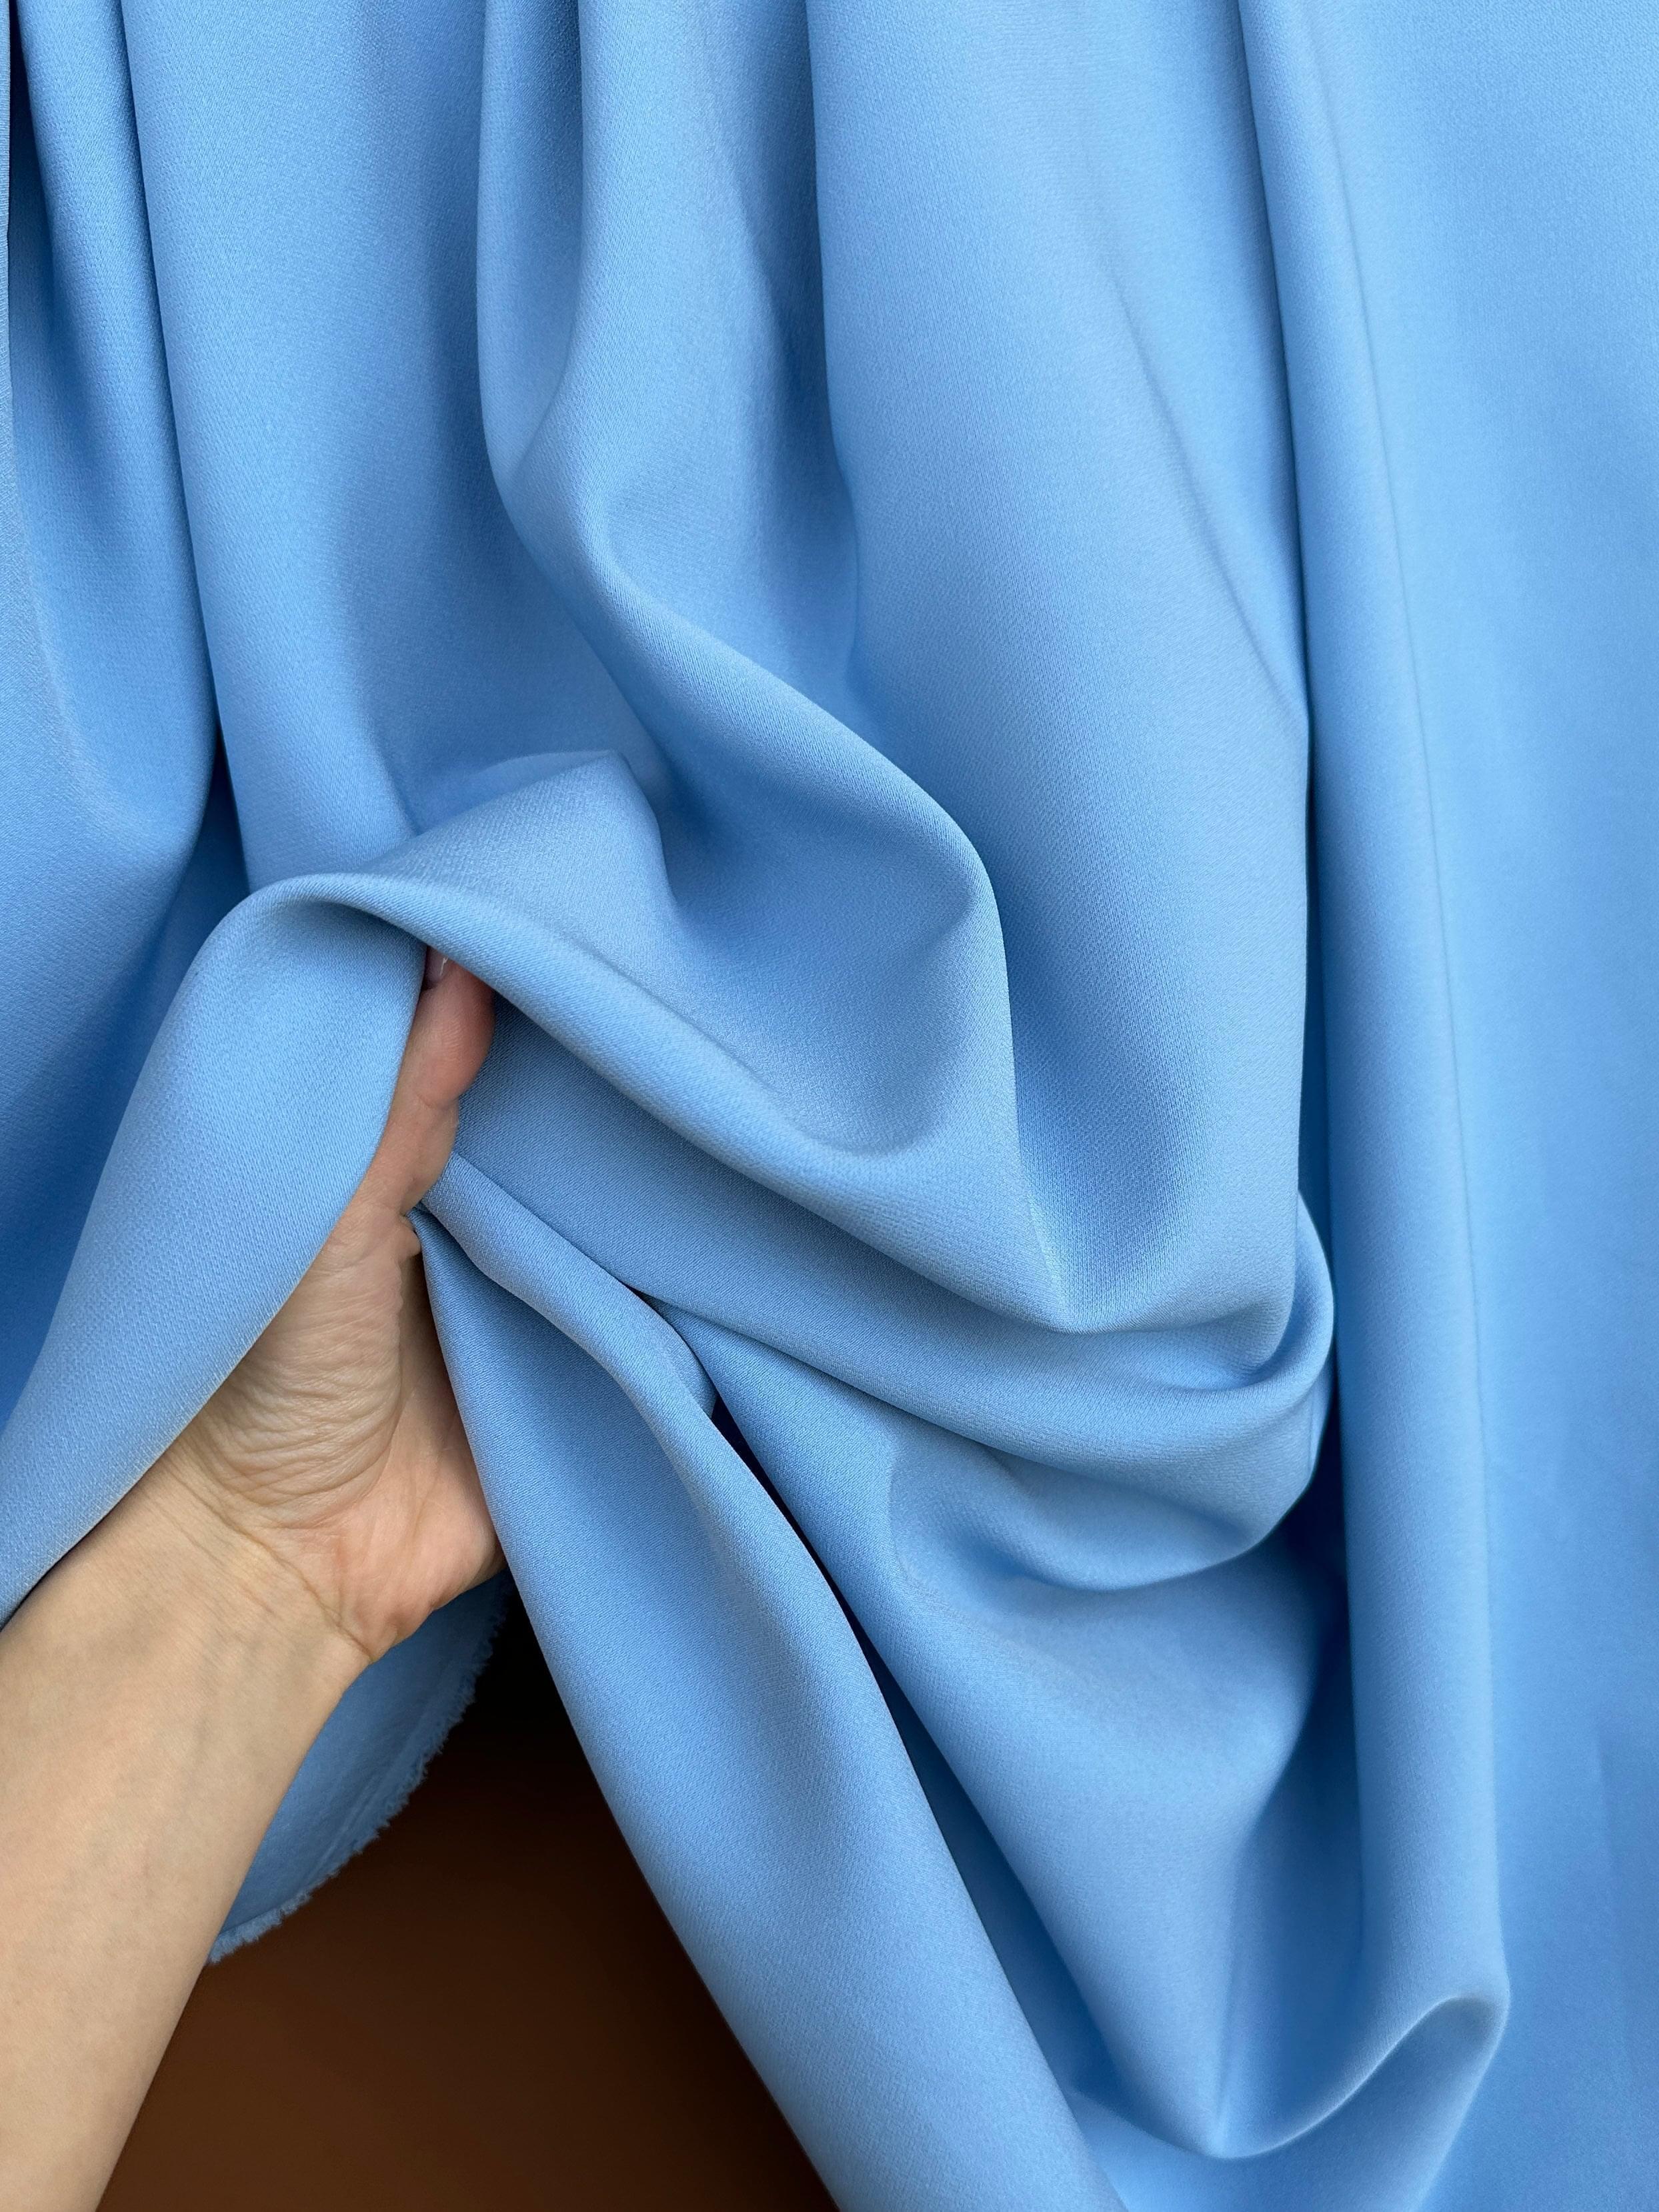 baby blue stretch crepe, Aqua Blue Stretch Crepe, blue stretch crepe, light blue stretch crepe, stretch crepe for woman, stretch crepe for bride,  crepe on discount, crepe in low price, crepe on sale, premium crepe, solid crepe, crepe, crepe fabric